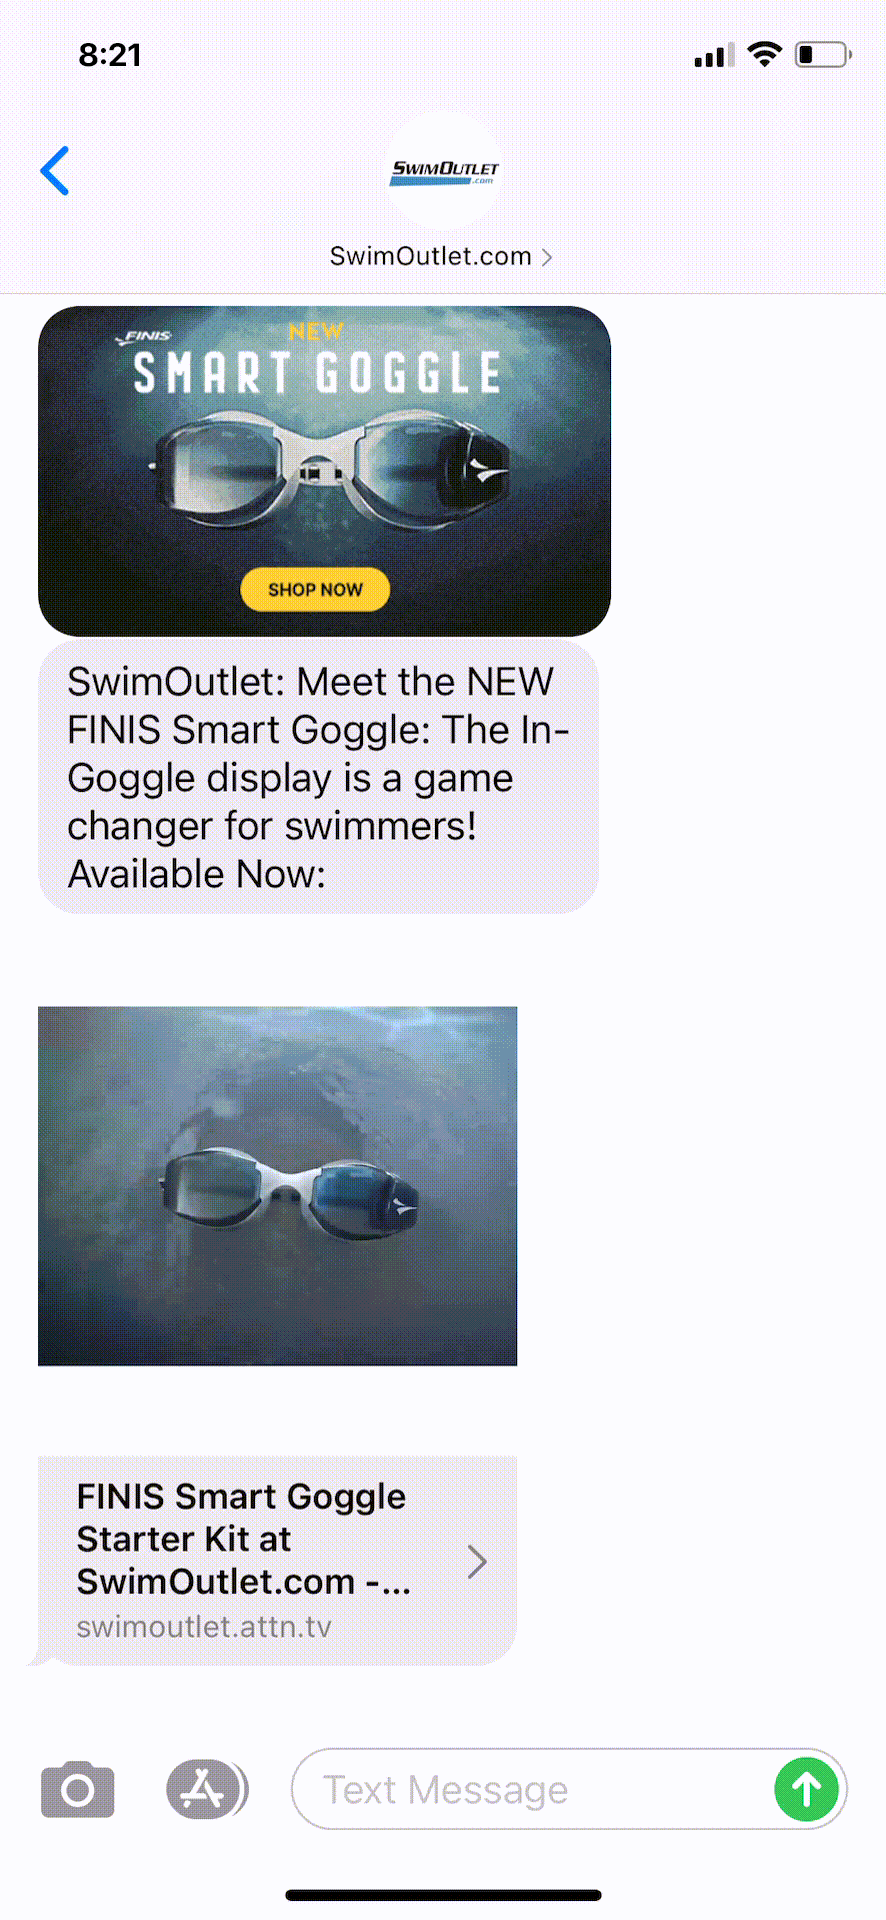 SwimOutlet.com-Text-Message-Marketing-Example-06.08.2021